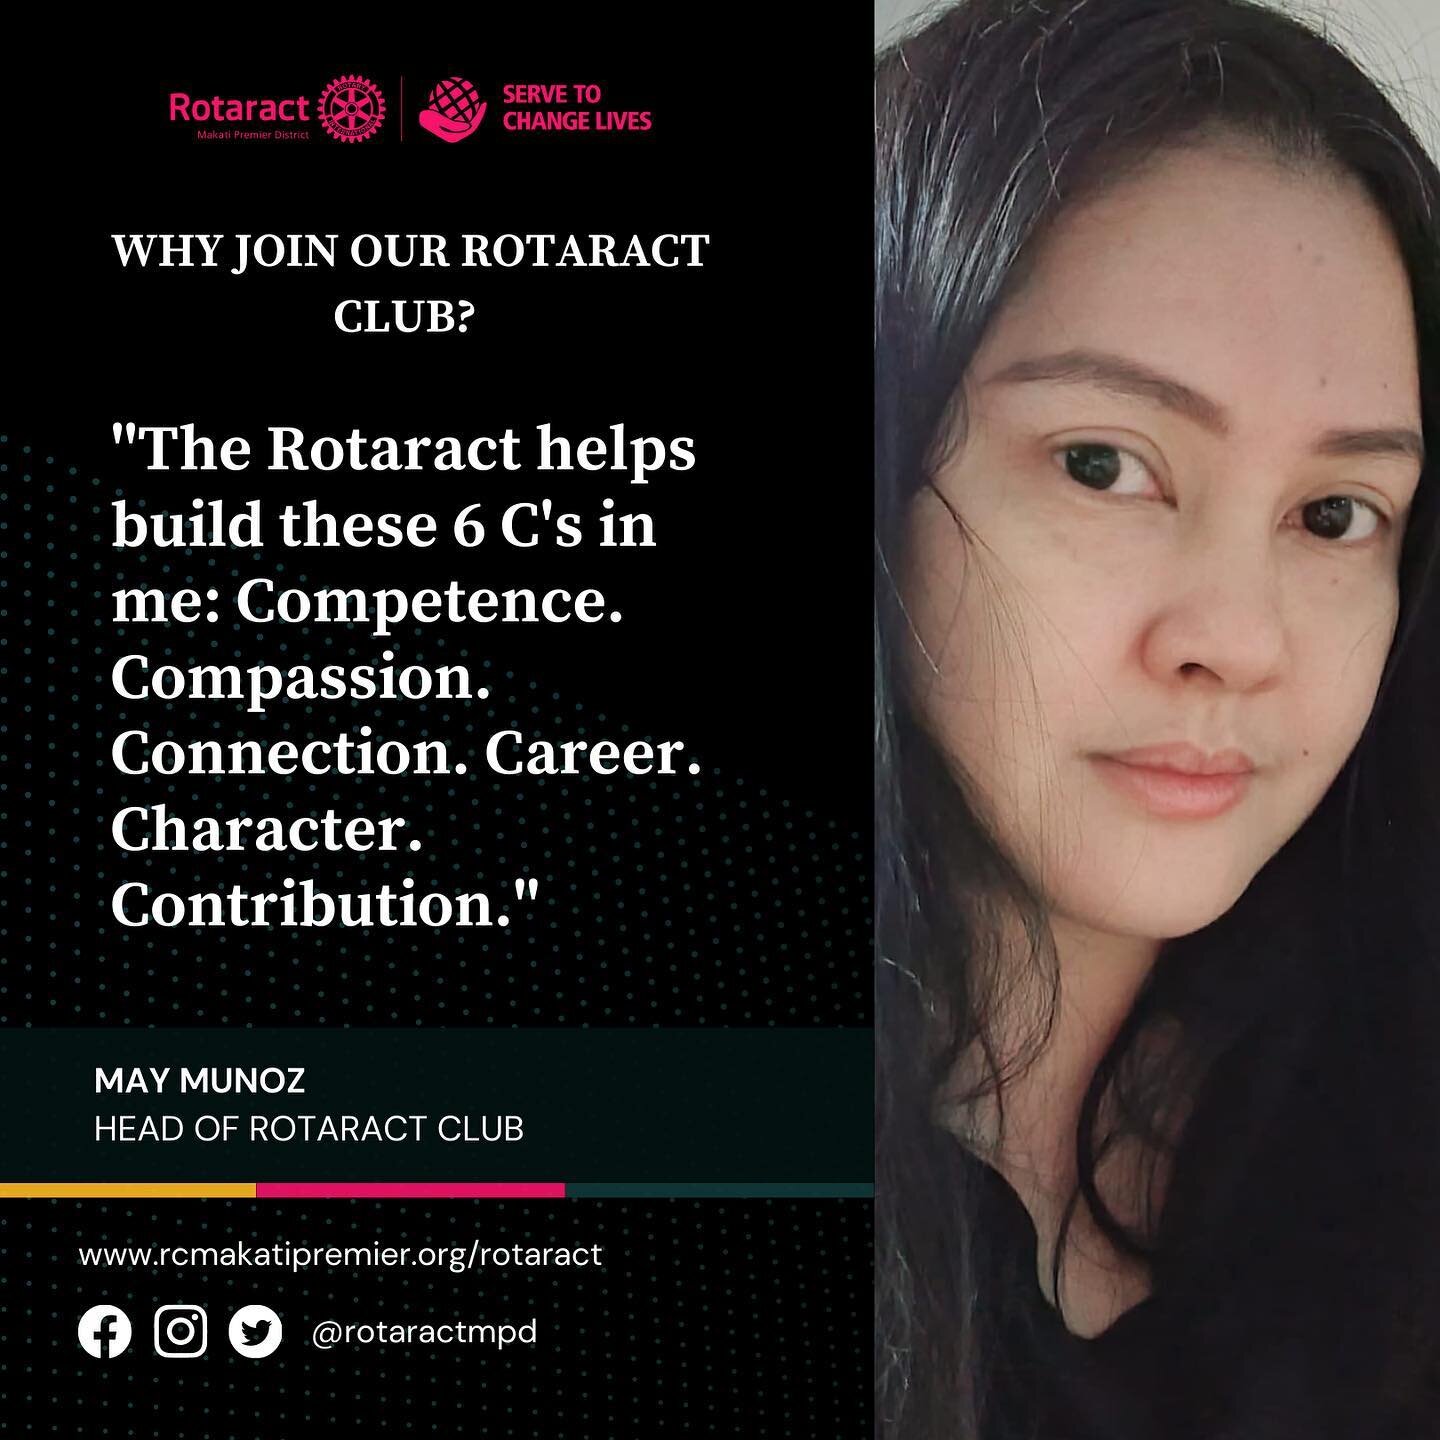 WE WANT YOU!

Join our dynamic group of young individuals serving to change lives!

www.rcmakatipremier.org/rotaract

#servetochangelives #rotaractclub #rotaractclubofmakatipremierdistrict
#rotaryinternational #rotaryclub #rotaractinternational #igda